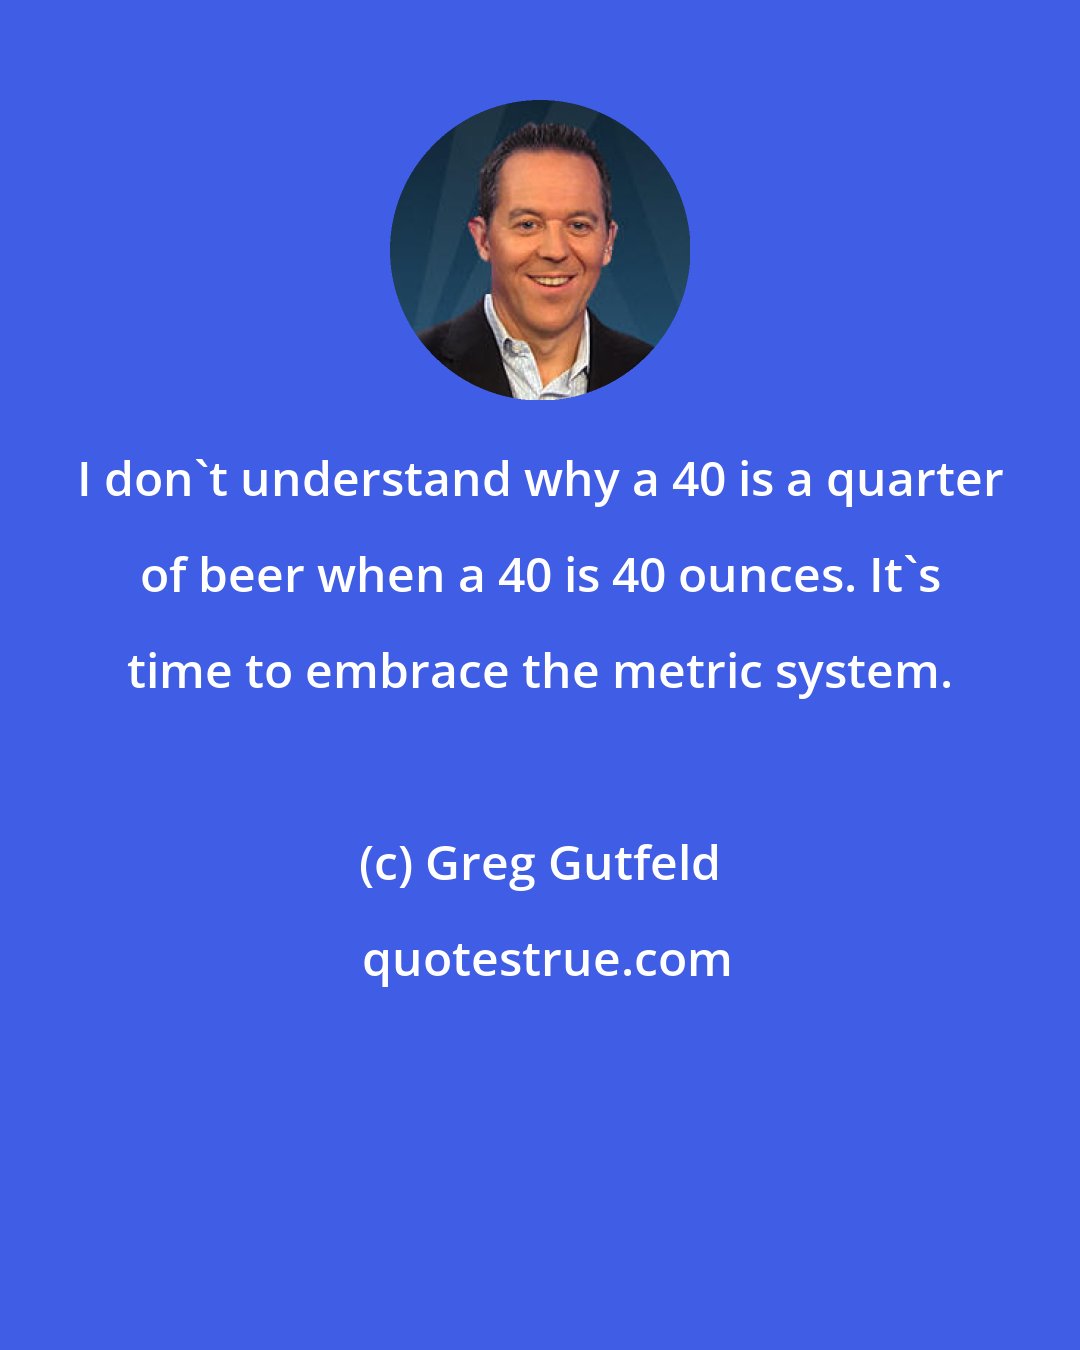 Greg Gutfeld: I don't understand why a 40 is a quarter of beer when a 40 is 40 ounces. It's time to embrace the metric system.